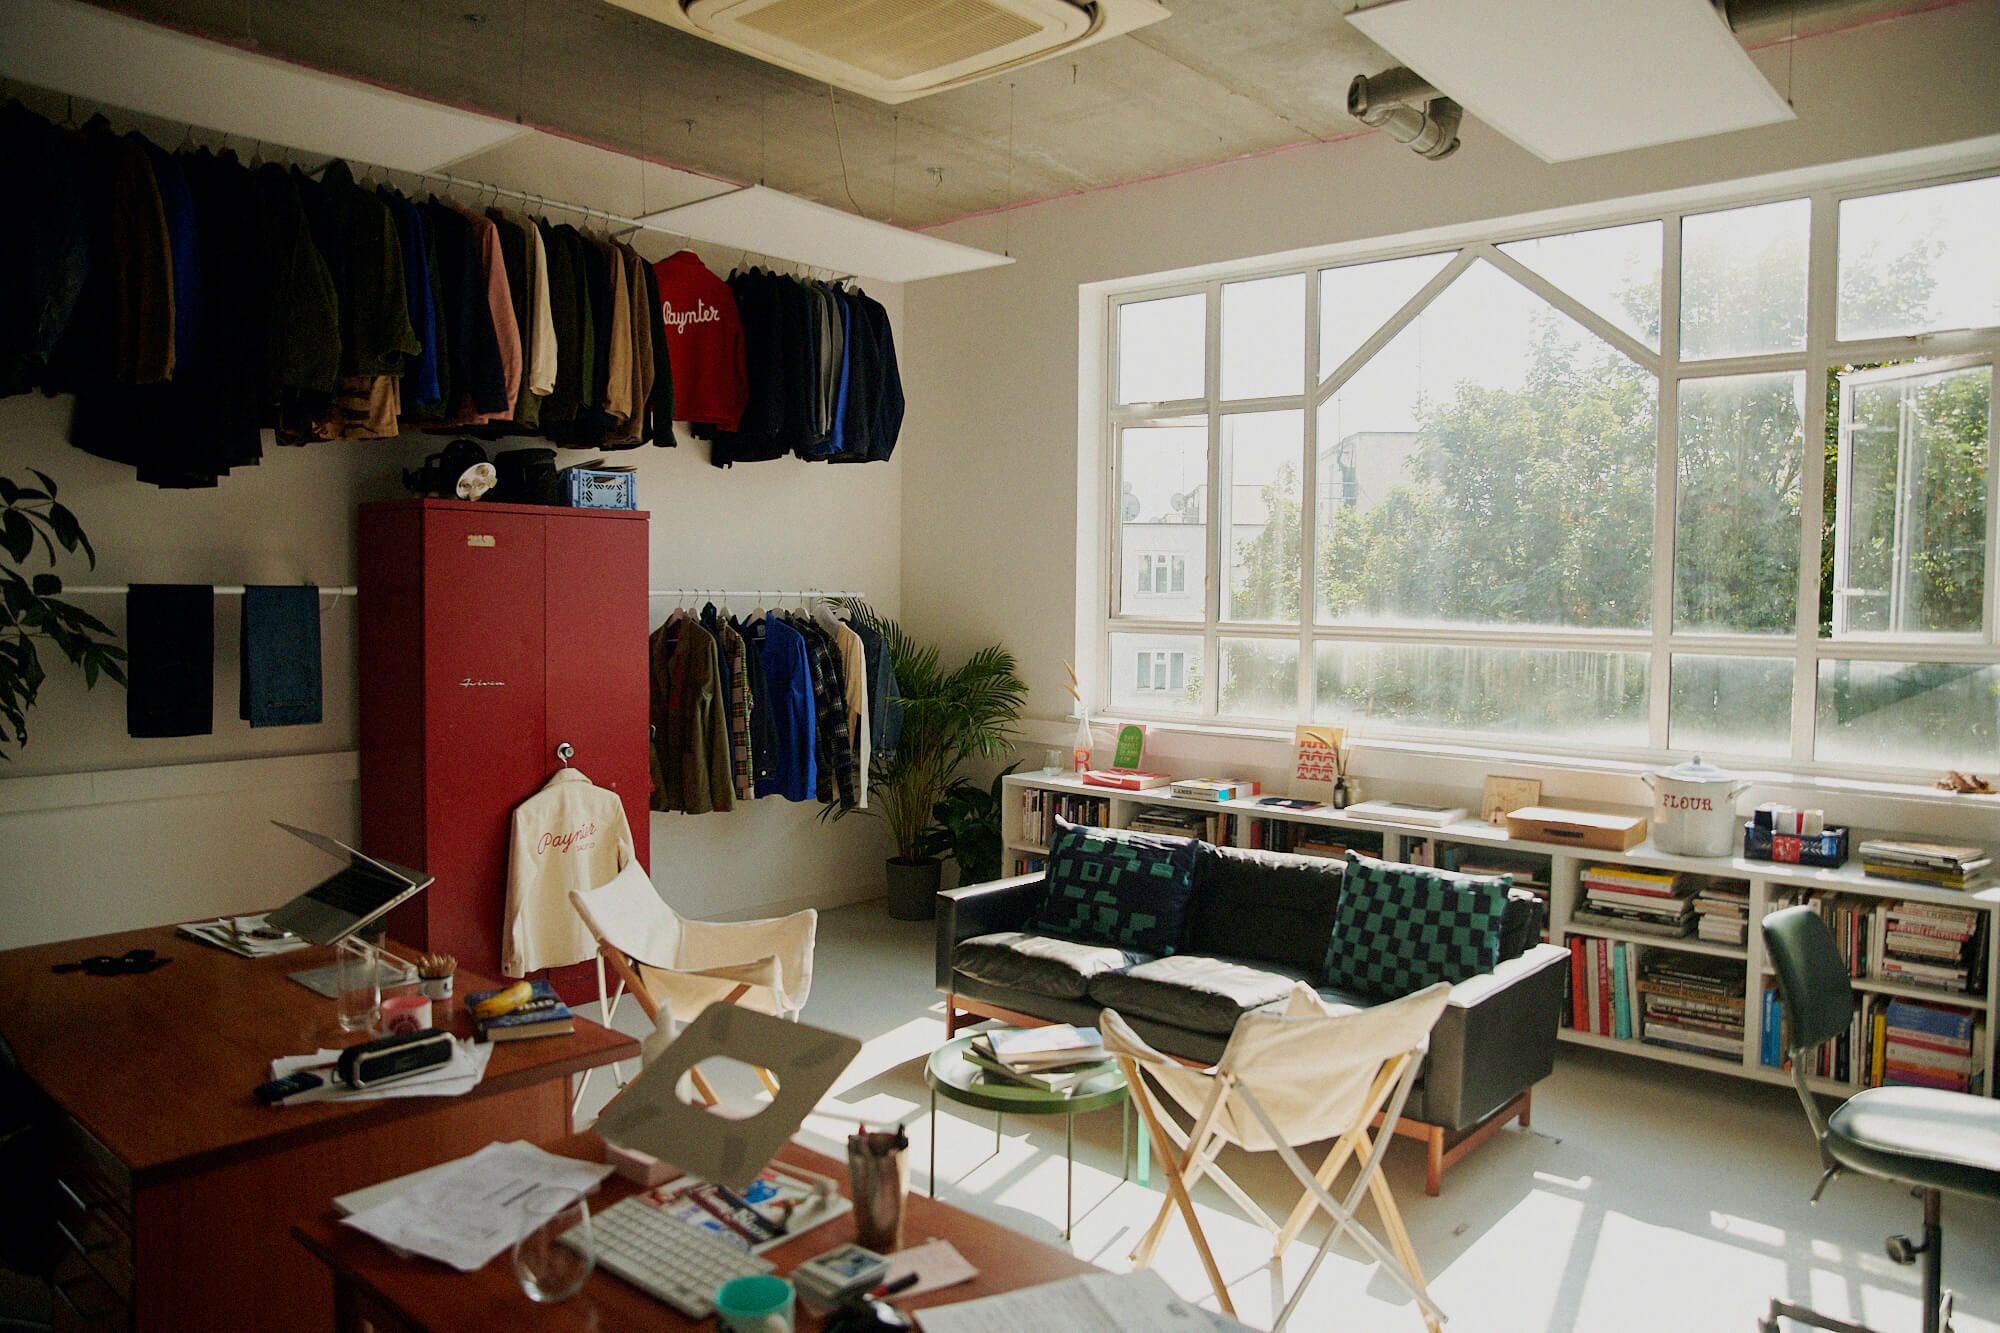 A clothing studio with a desk, sofa, and jackets hanging on the side.